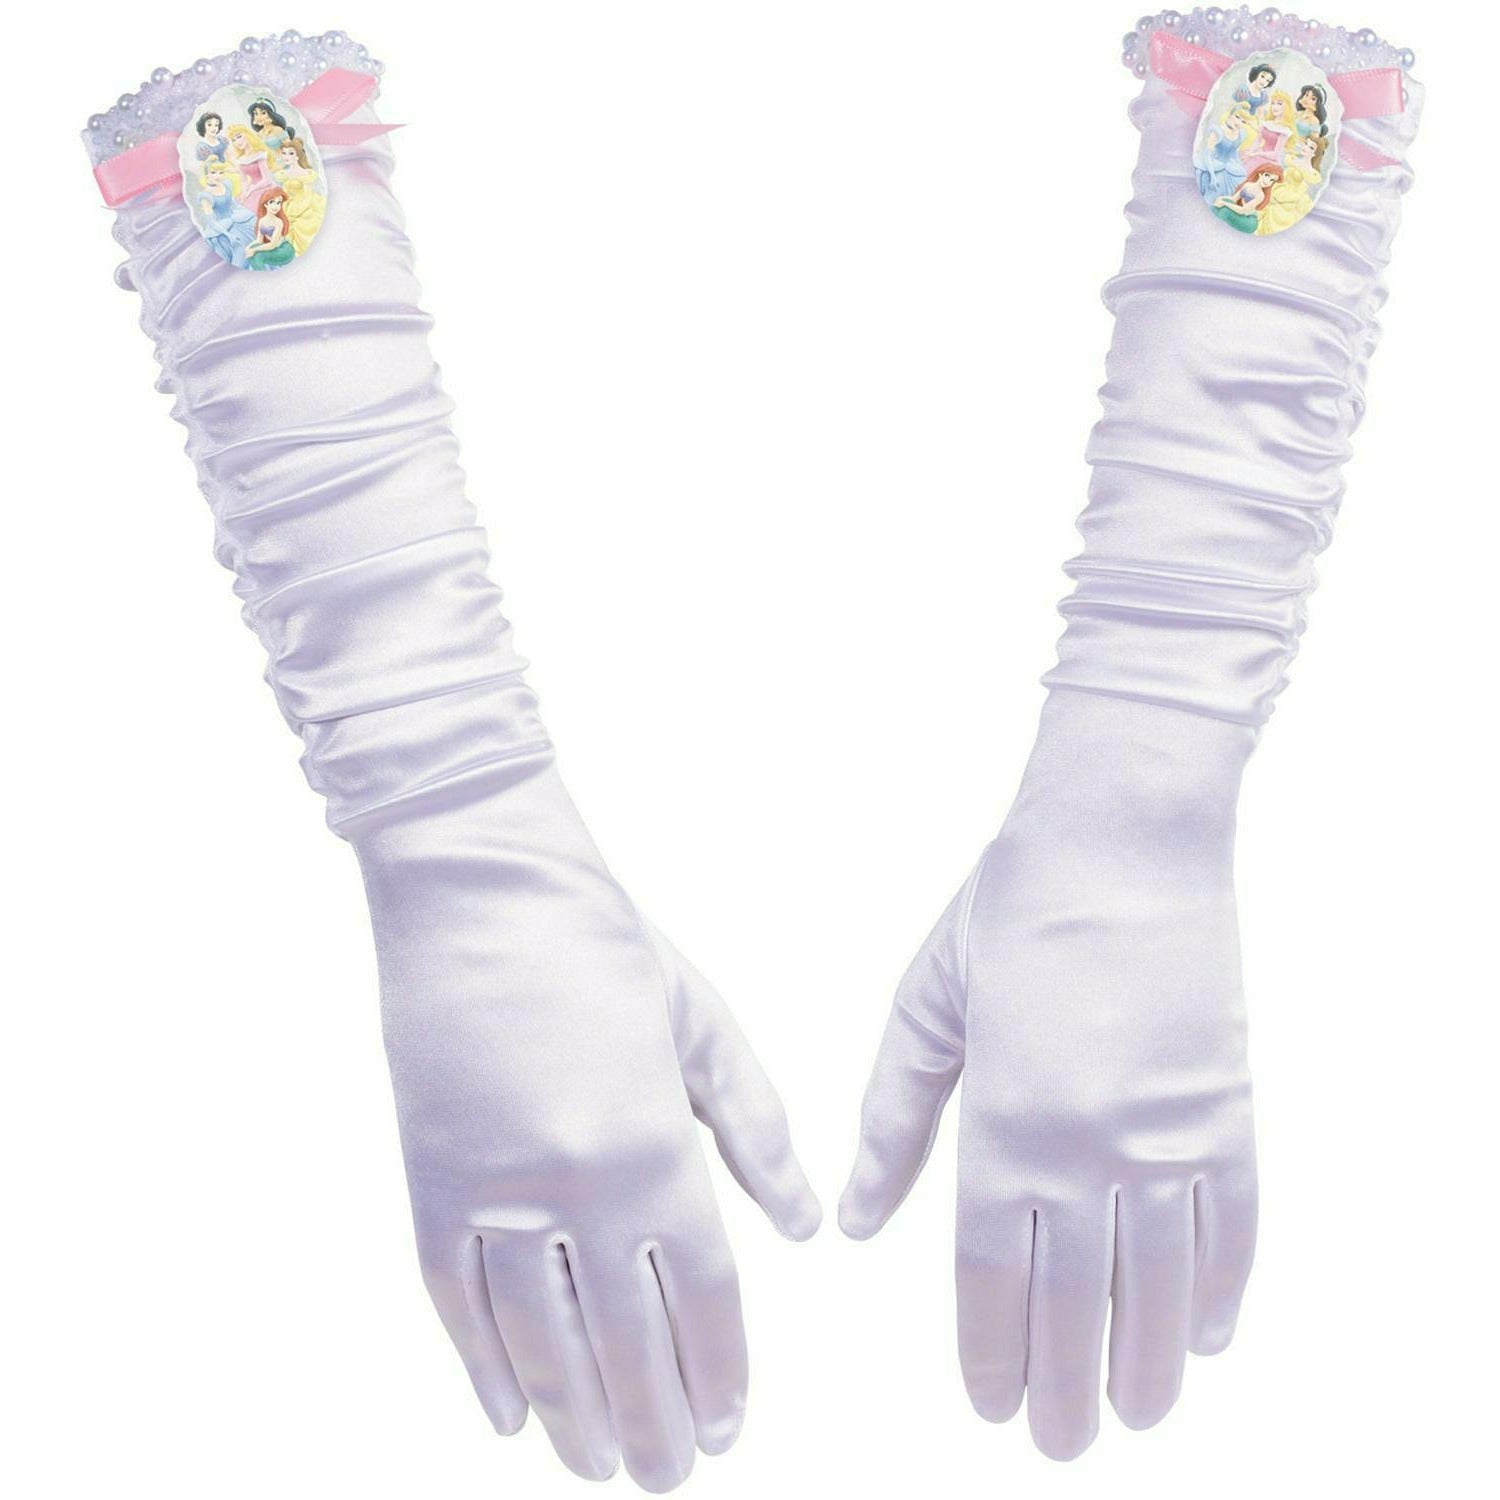 Disguise Child Princess Full Length Gloves